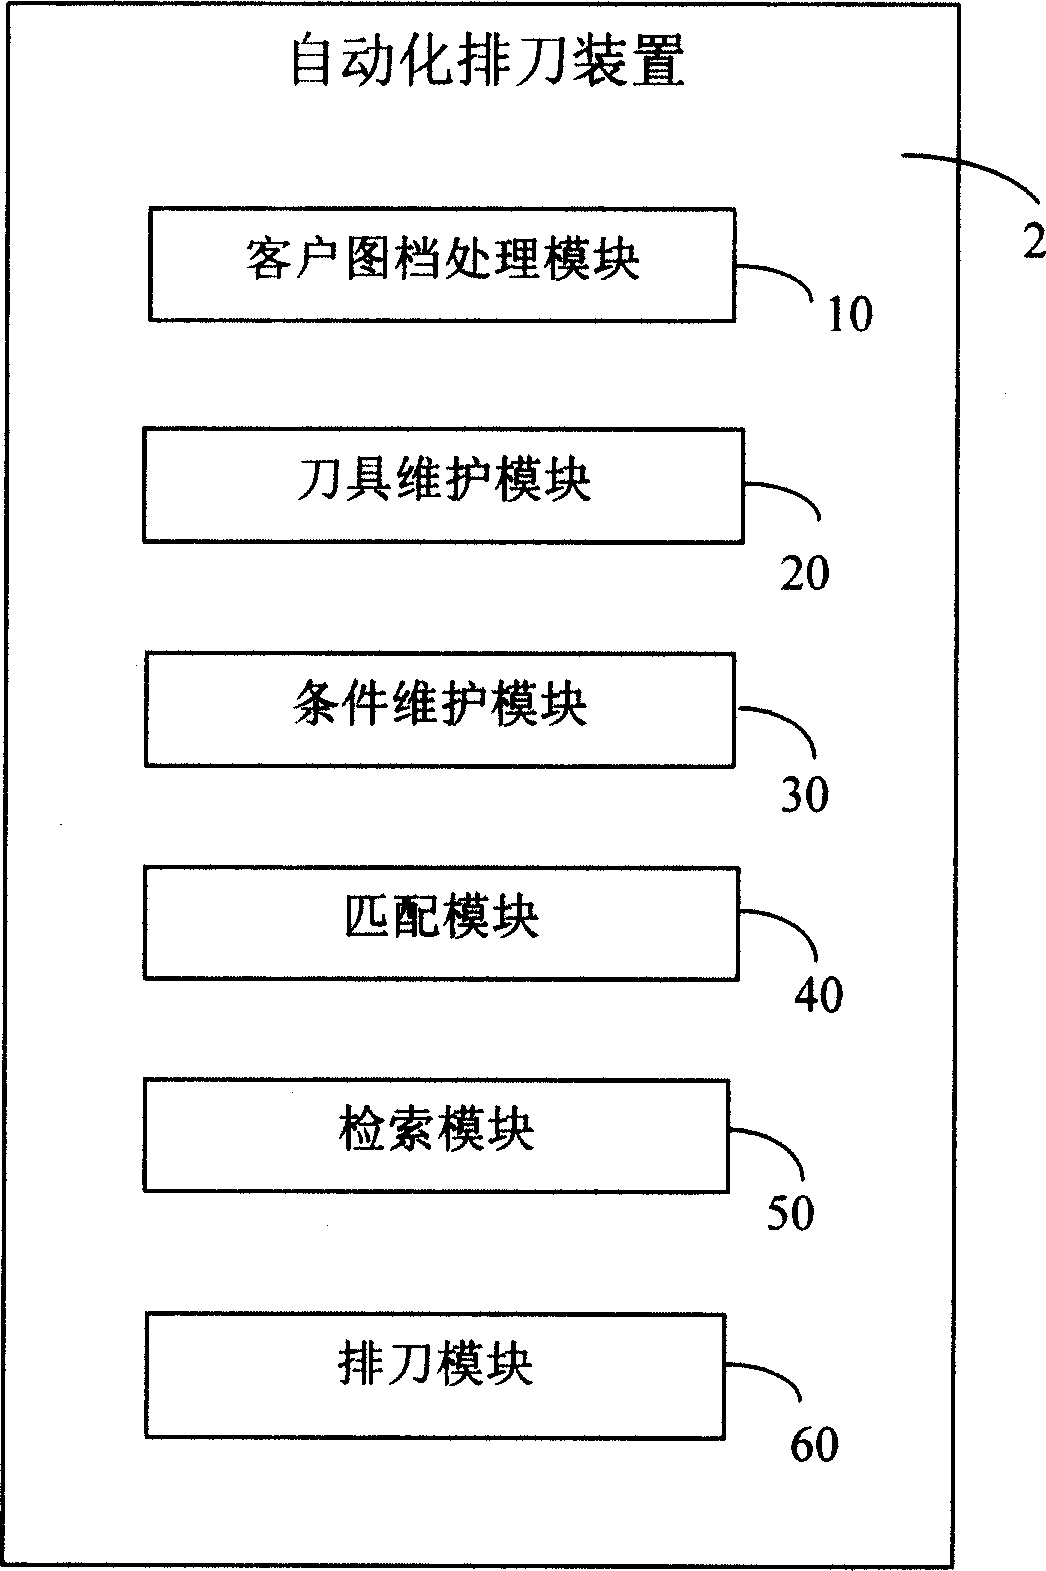 Automatic cutter-arranging device and method